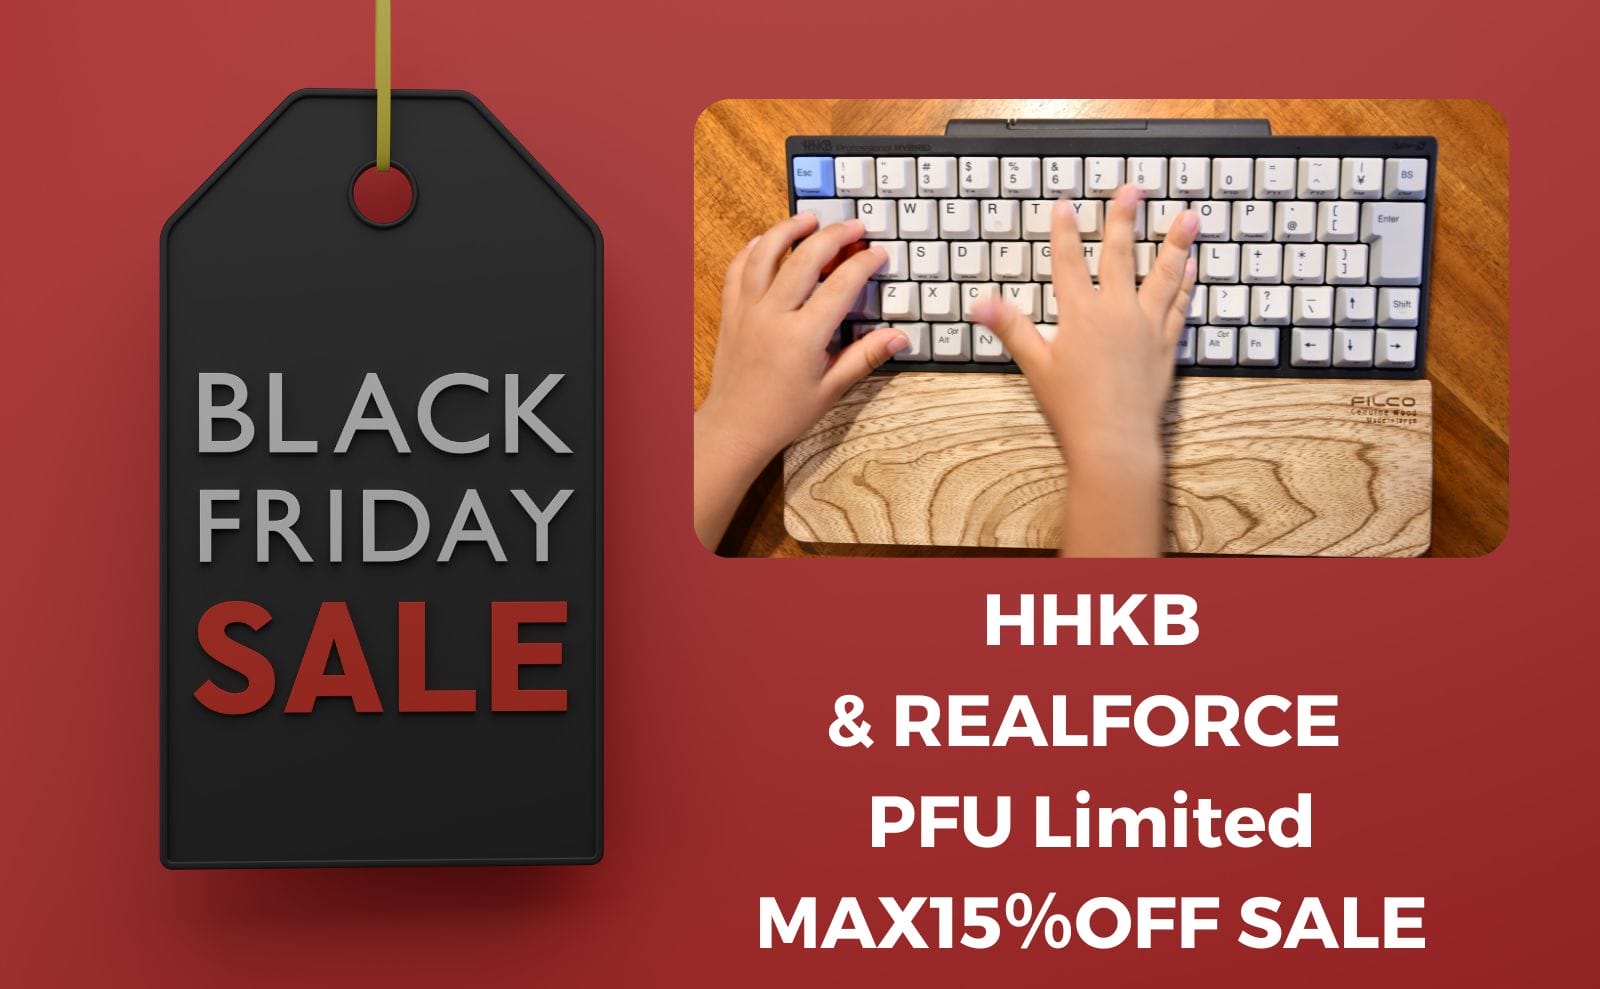 HHKB and REALFORCE on Sale at Amazon! Chance to save up to 5,000